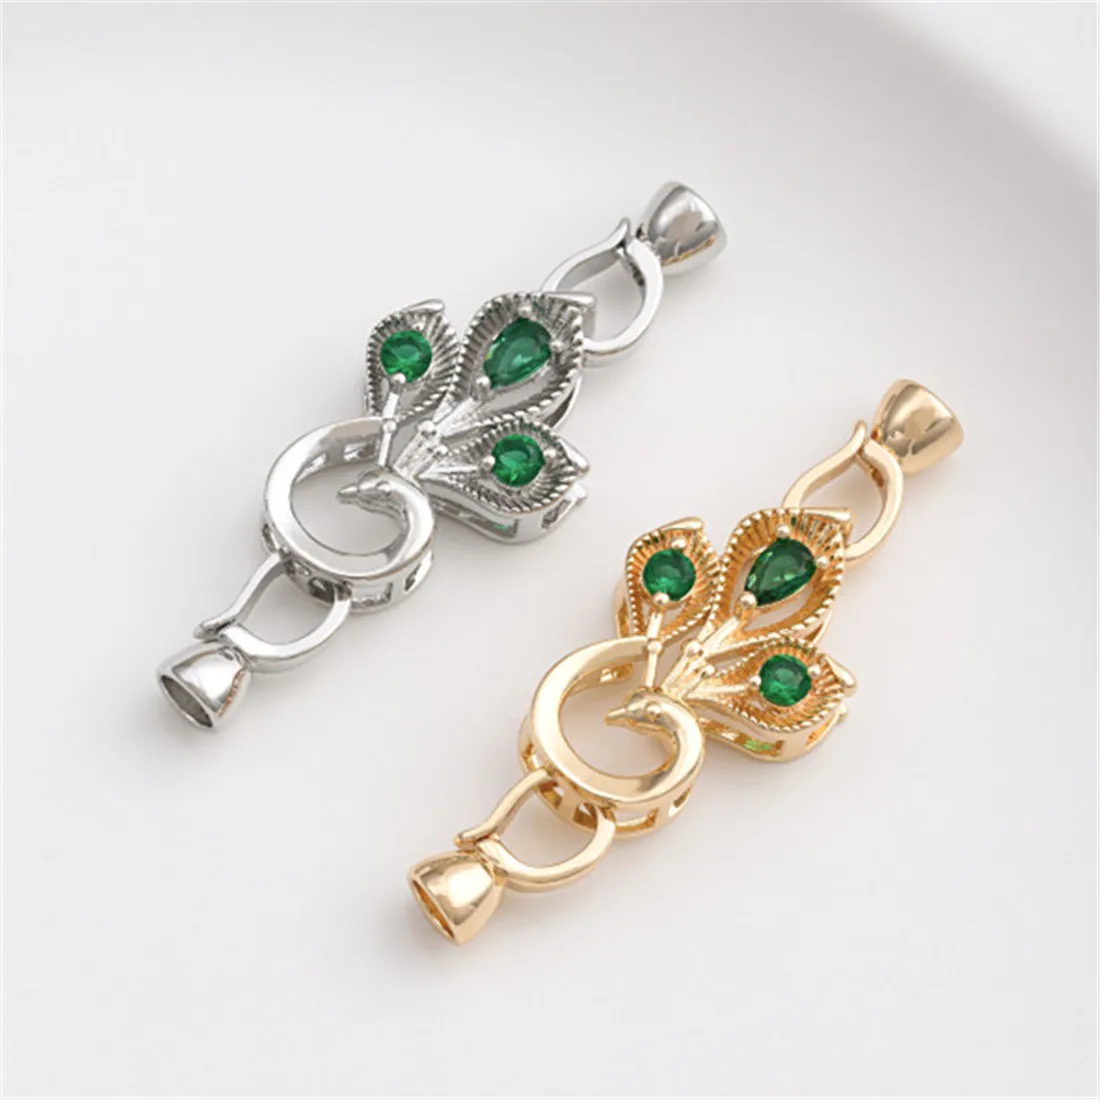 14K Gold Inlaid Green Zircon Peacock Pearl Buckle Handcrafted DIY Pearl Necklace Sweater Chain Connecting Buckle C007 14k gold inlaid zircon fashion bow ot buckle diy pearl necklace pendant buckle jewelry accessories b888